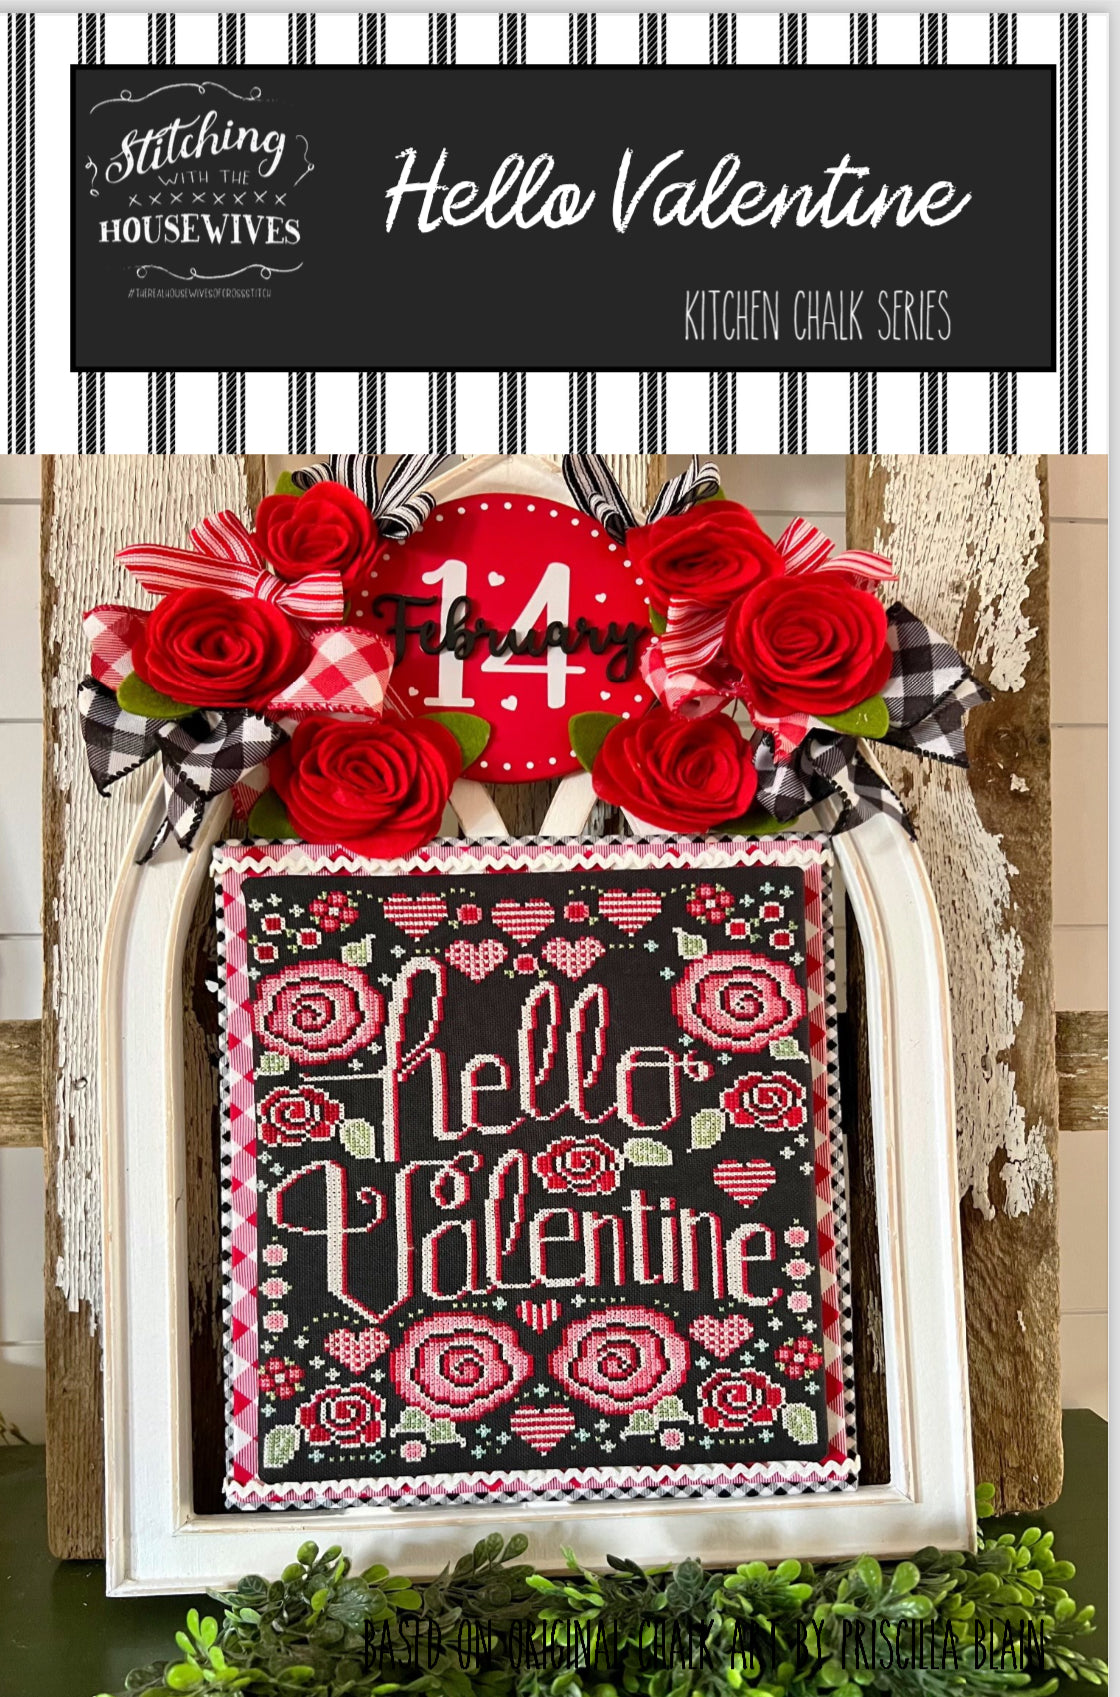 Hello Valentine by Stitching with the Housewives